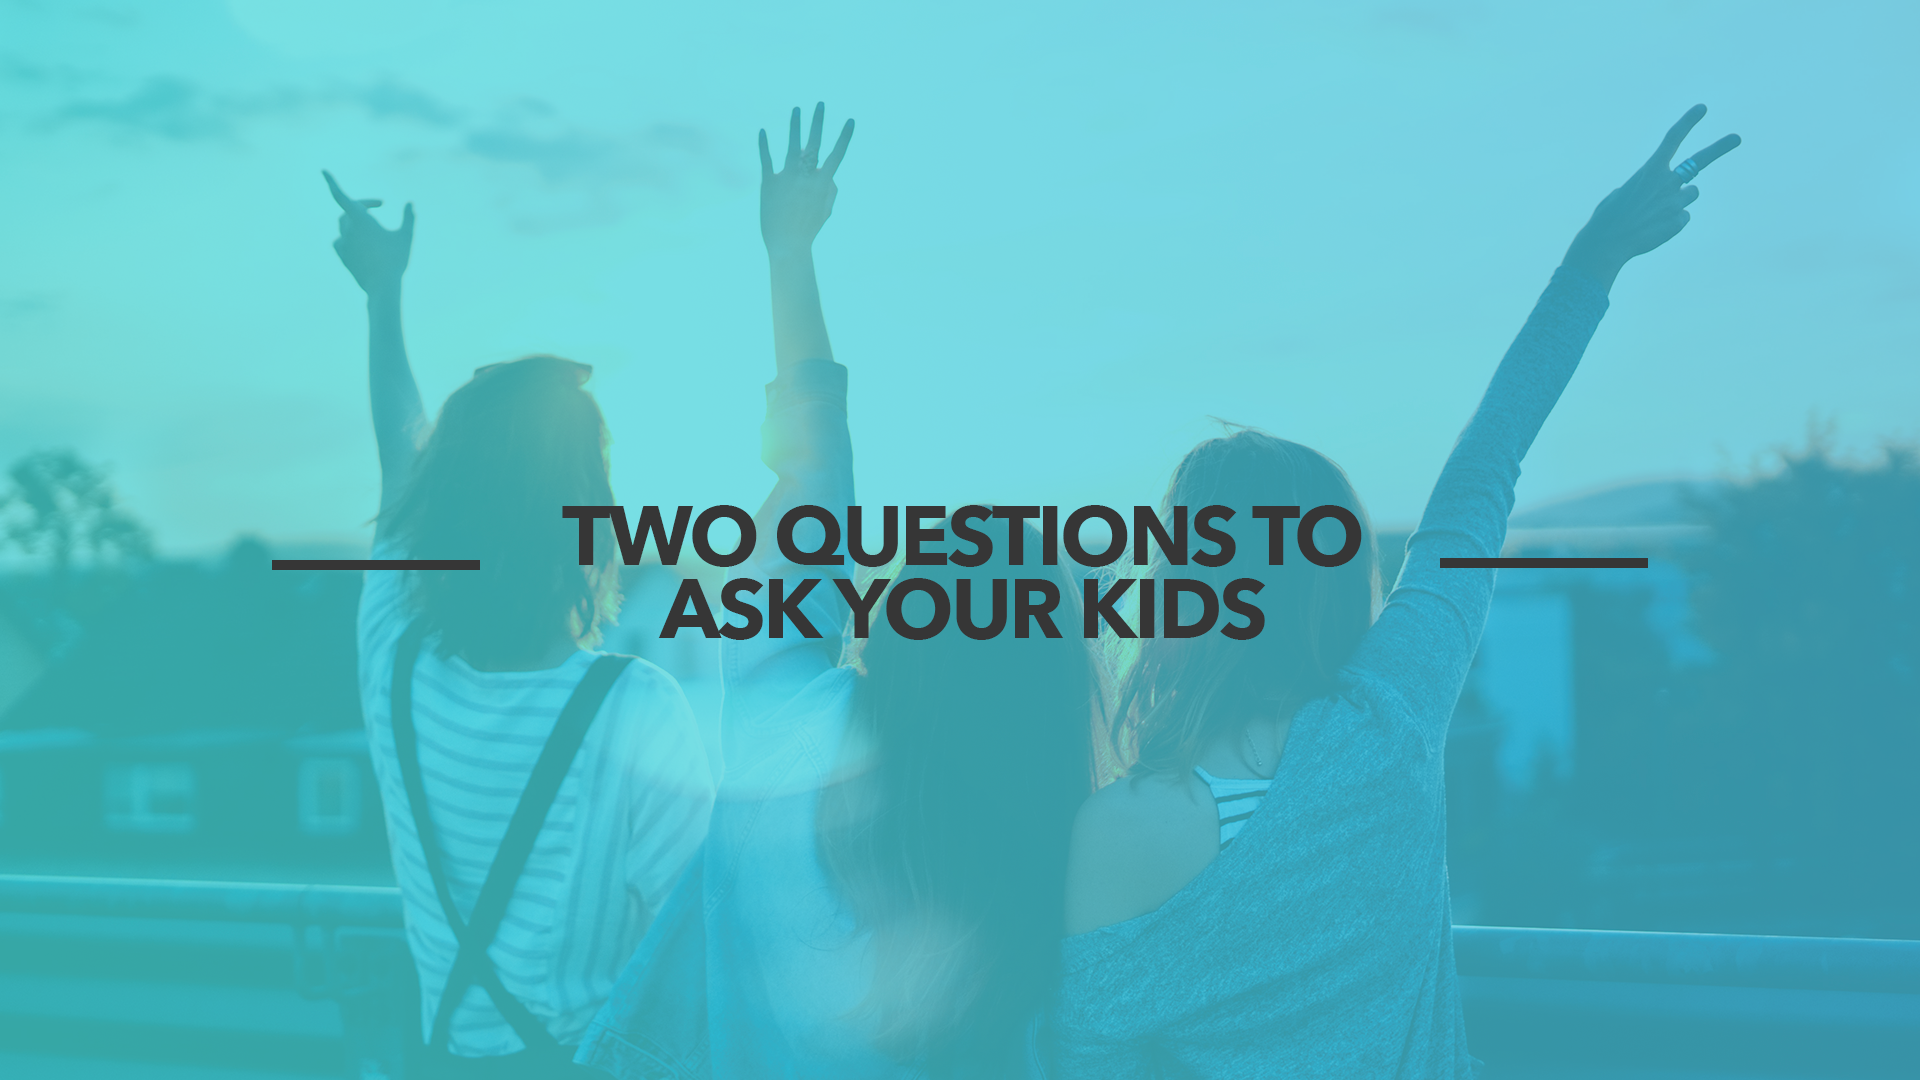 Two questions to ask your kids